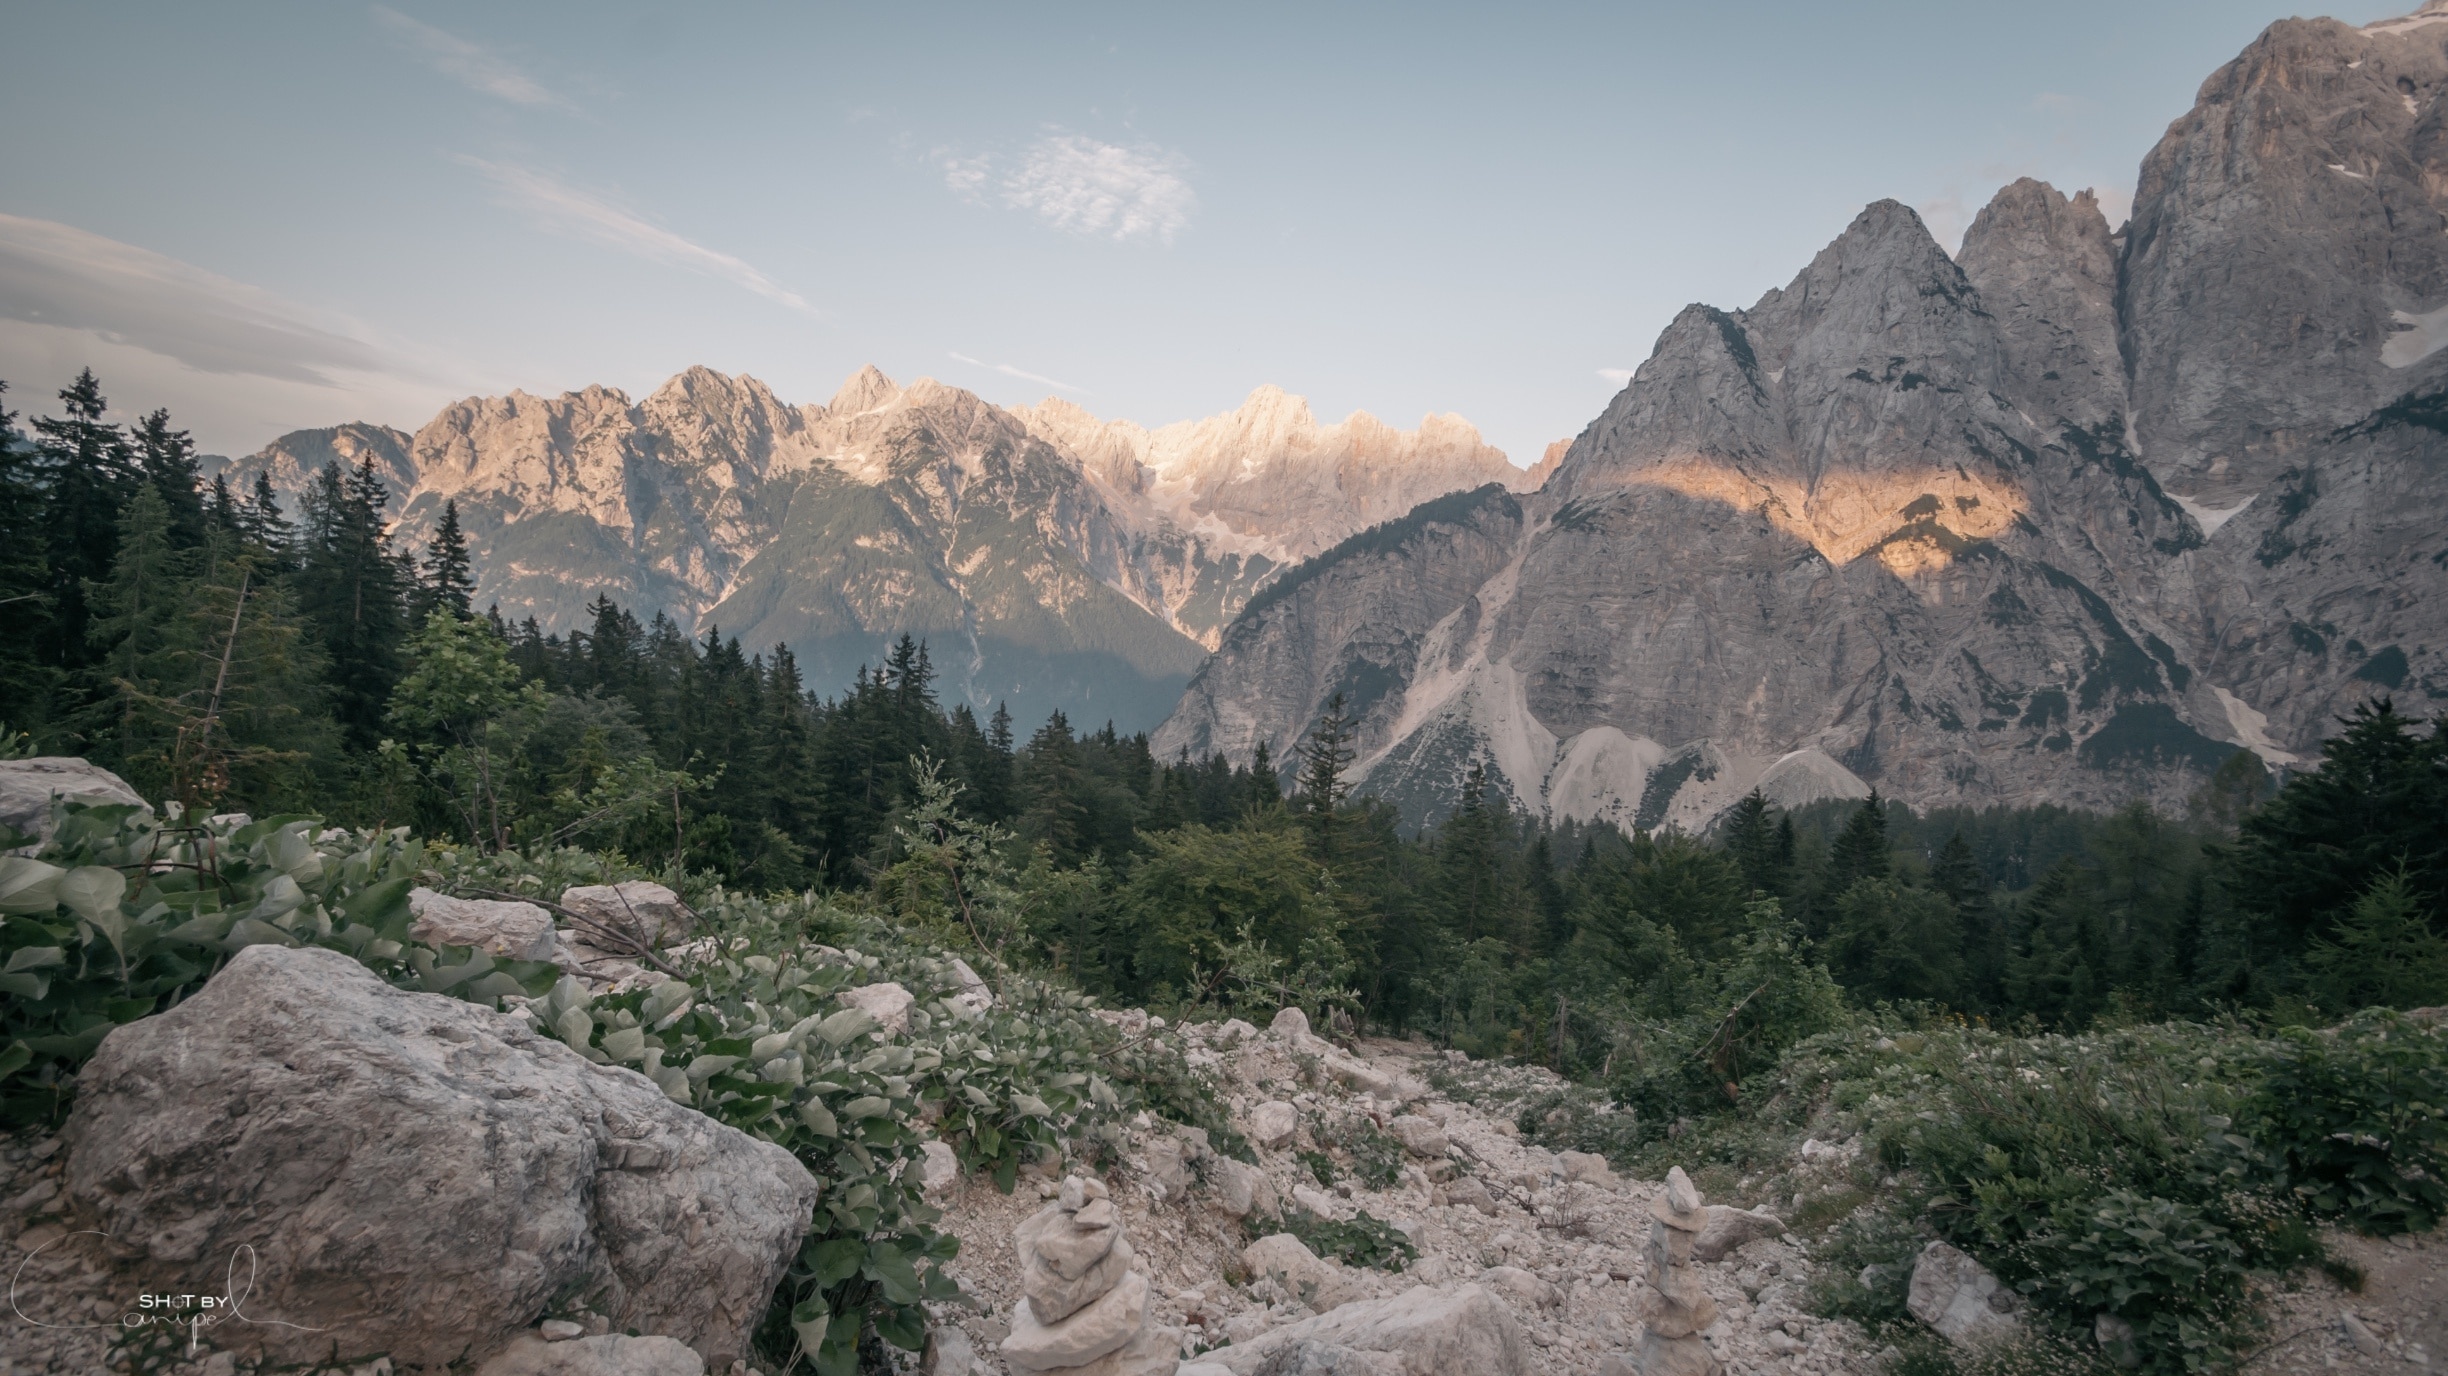 One of the earliest national parks in Europe and the only one in Slovenia, the Triglav NP. Named after the highest summit in Slovenia. Many great things to discover, from adventure to history, from hiking to canyoning. First time i was there, i was blown away by its charming beauty!
#troveon #nationalpark #mountains #travel